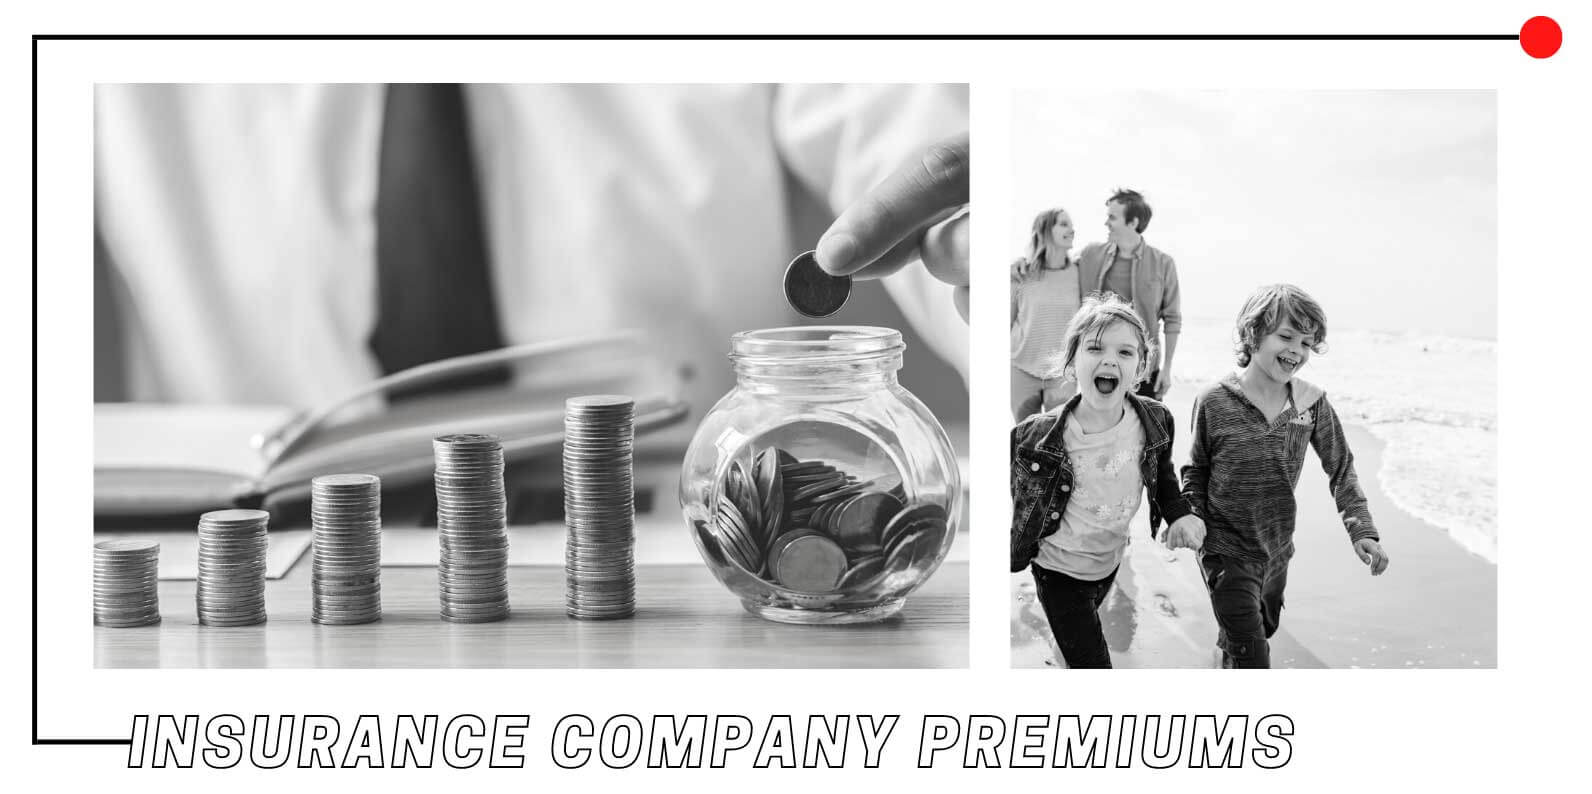 Insurance-Company-Premiums-Explained.-Money-in-Jar